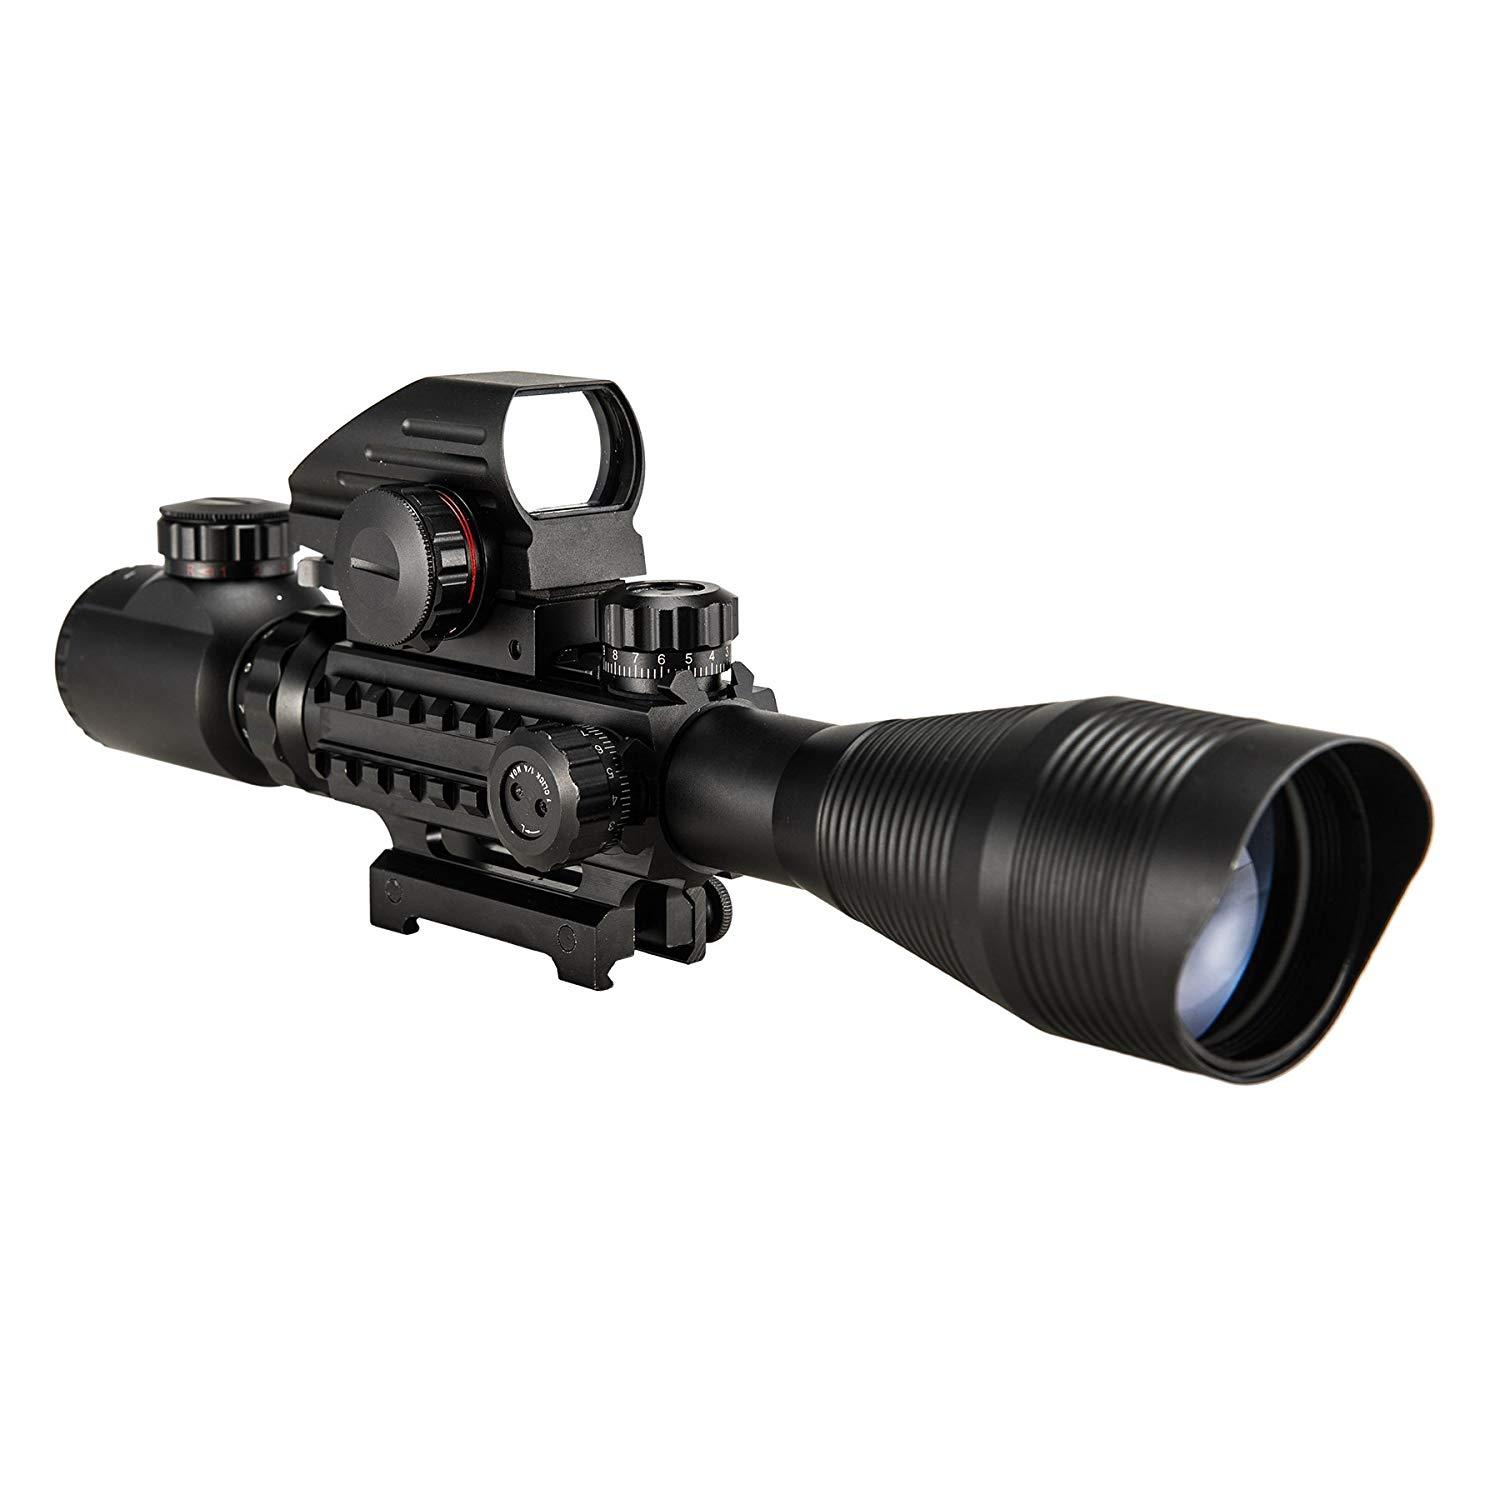 best hunting scopes 2021 2022 3-in-1 Rifle Scope 4-12x50mmEG Rangefinder/Tactical Reticle Scope/Laser Sight & Red Dot Sight